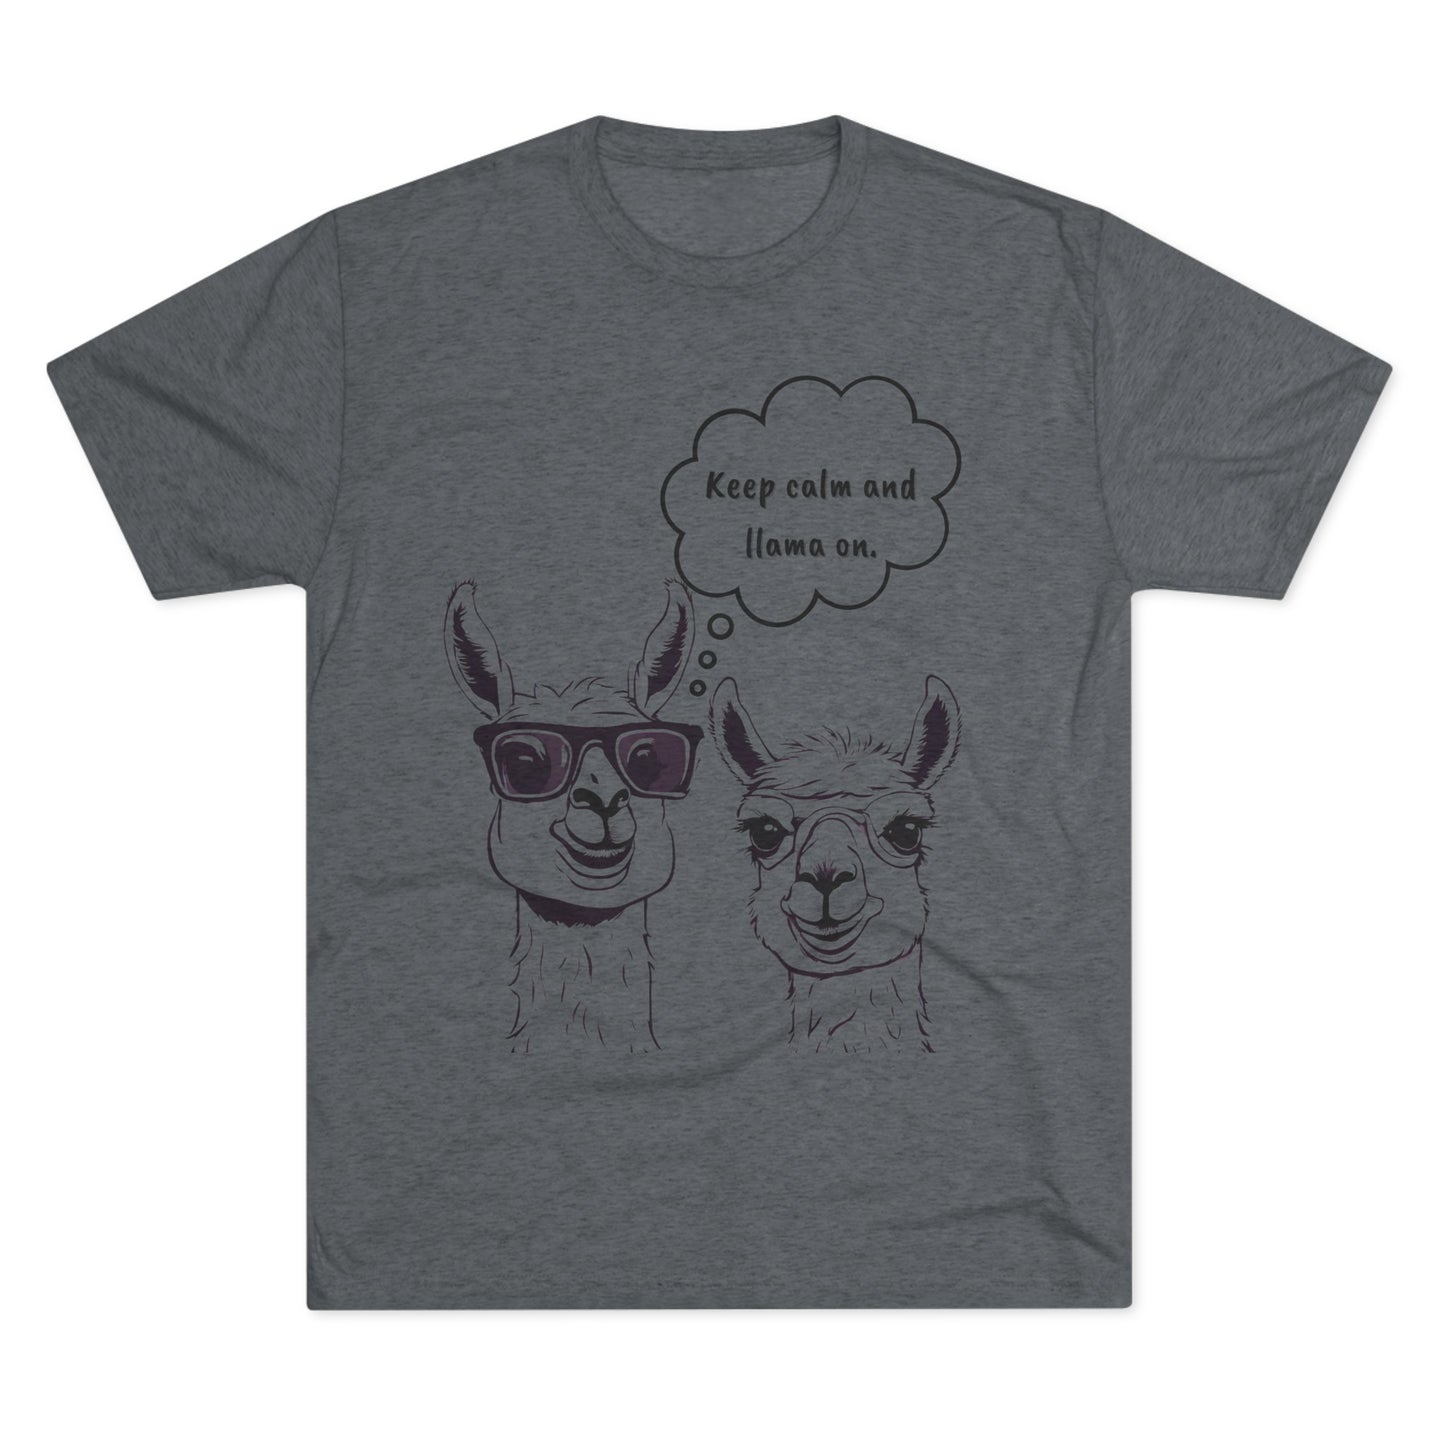 Gray t-shirt featuring two illustrated llamas. The left llama wears sunglasses with a speech bubble reading, "Keep calm and llama on." Made from breathable fabric, this casual black print design is perfect for any relaxed day.

Product: Keep Calm and Llama On - Tri-Blend Crew Tee - Unisex Fit
Brand: Printify